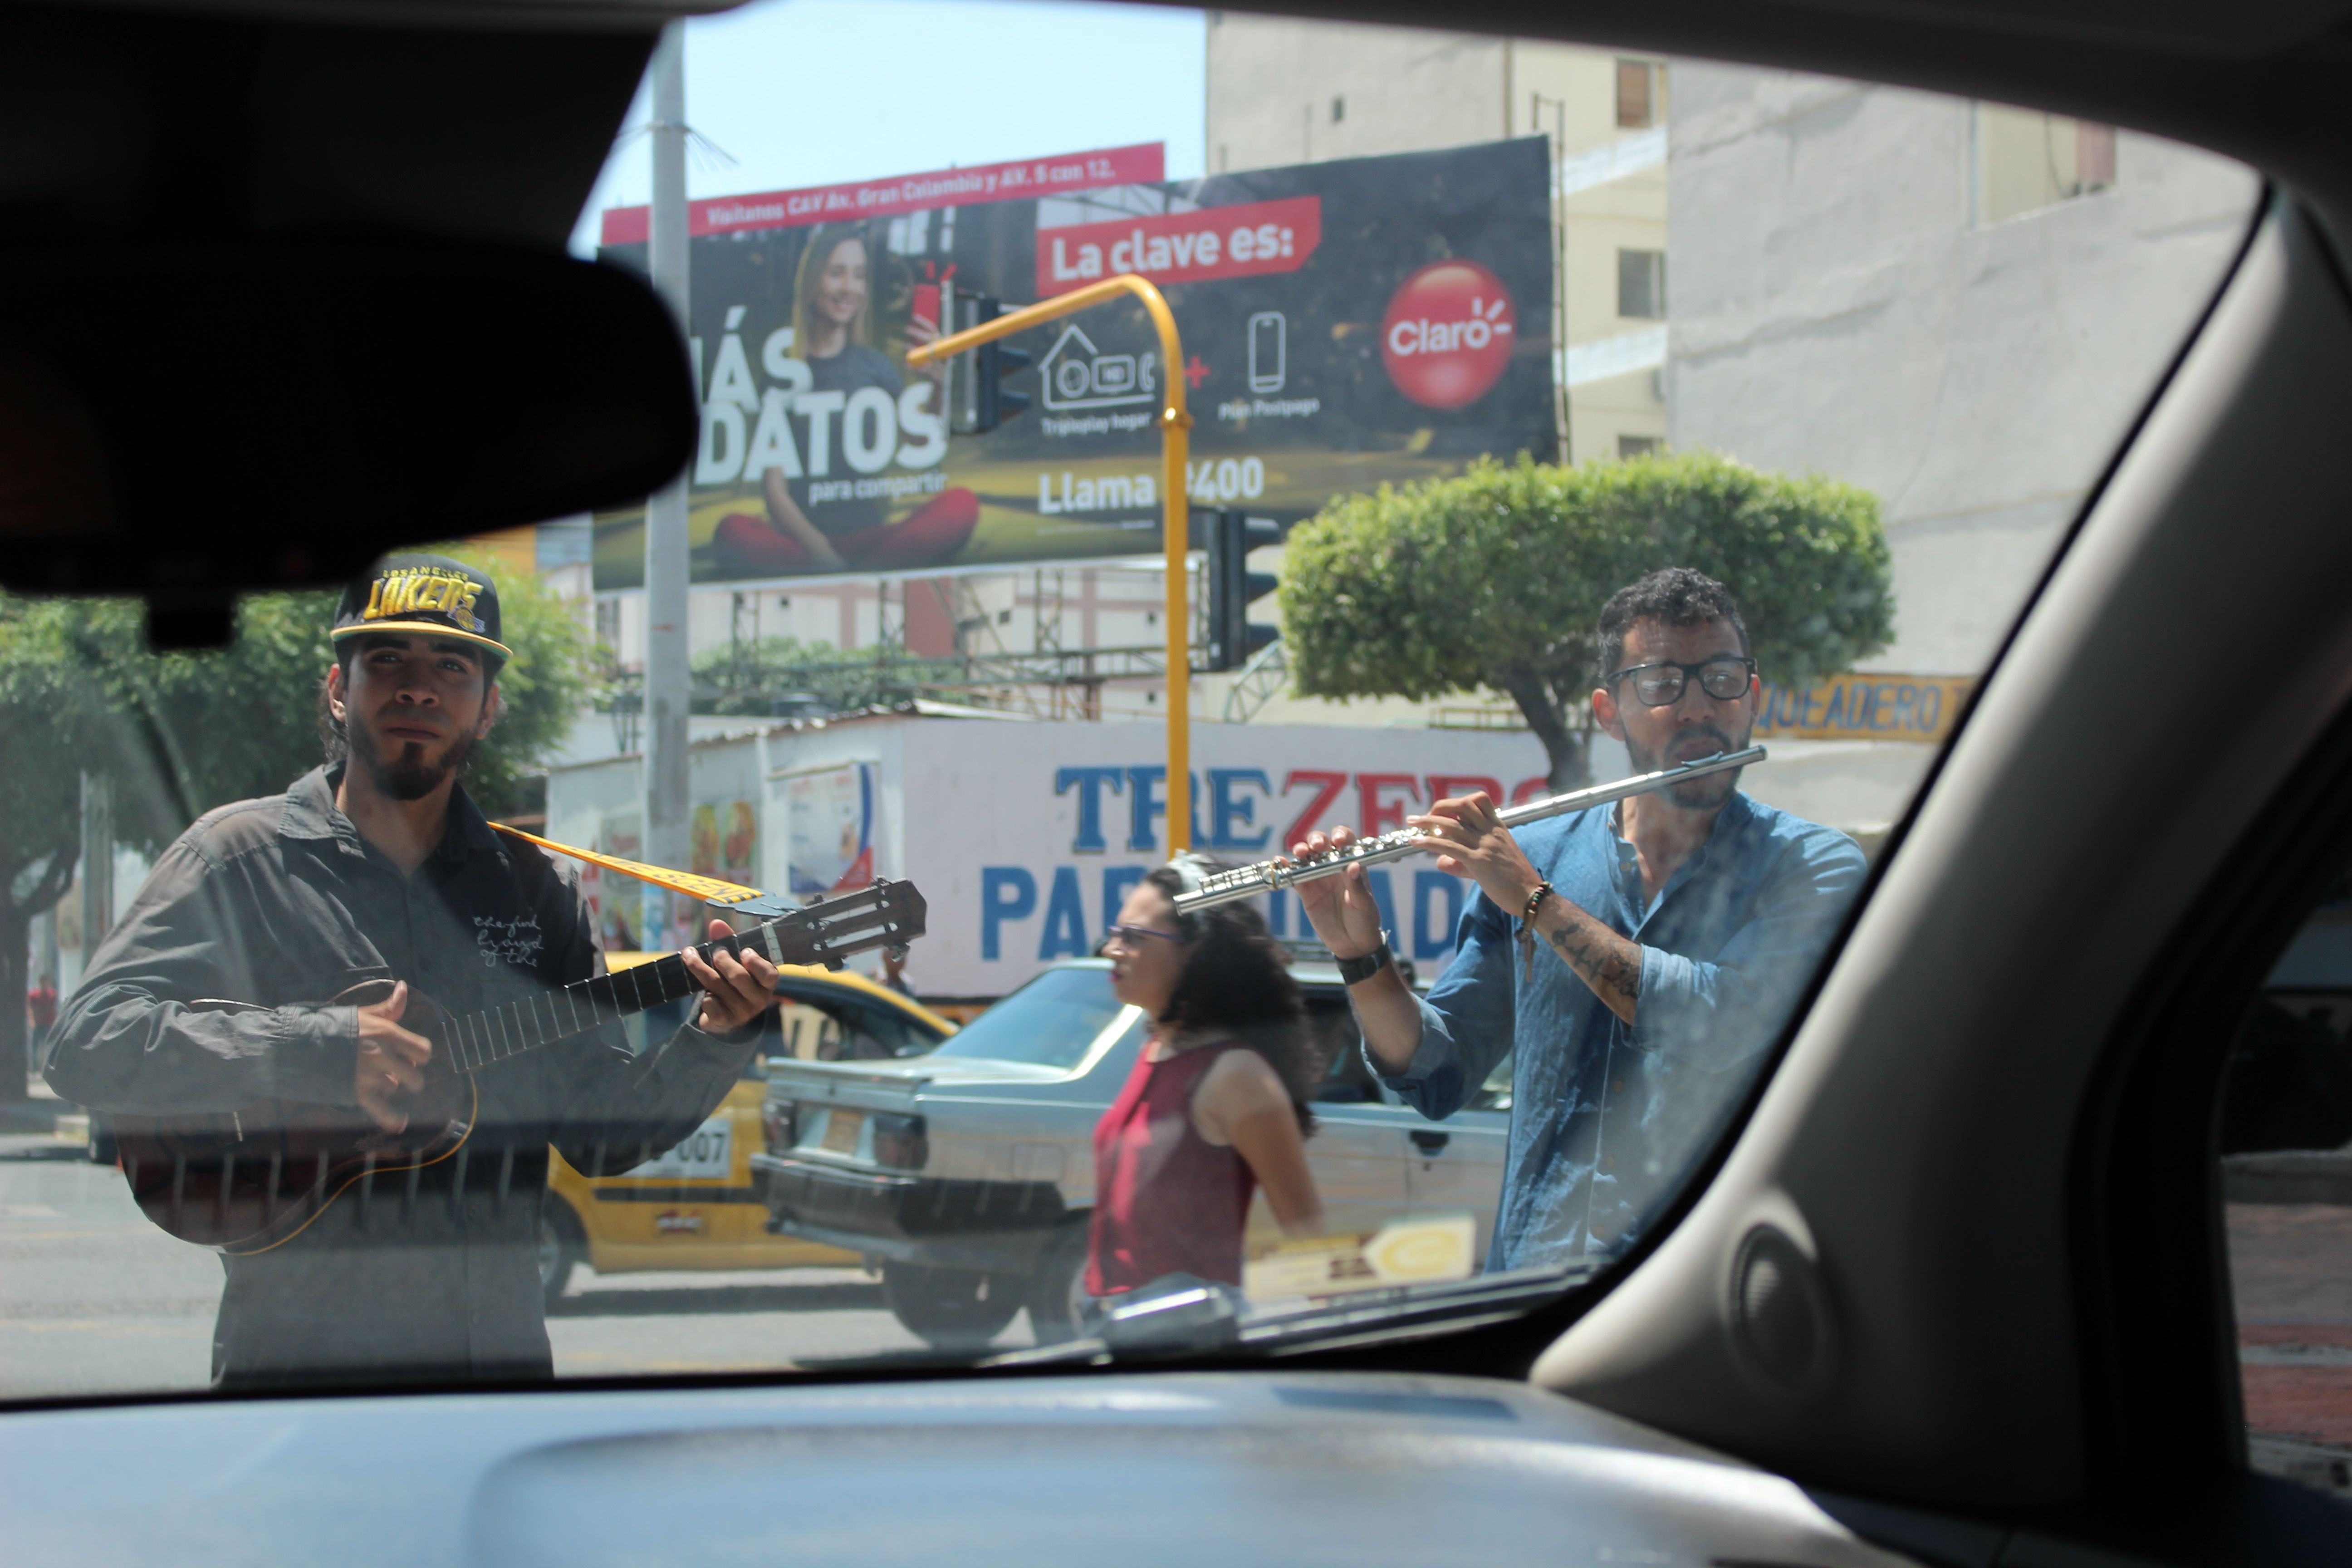 Venezuelans perform at a stoplight. One of them plays a popular Venezuelan instrument known for its four strings, a cuatro. Image by Mariana Rivas. Colombia, 2019.